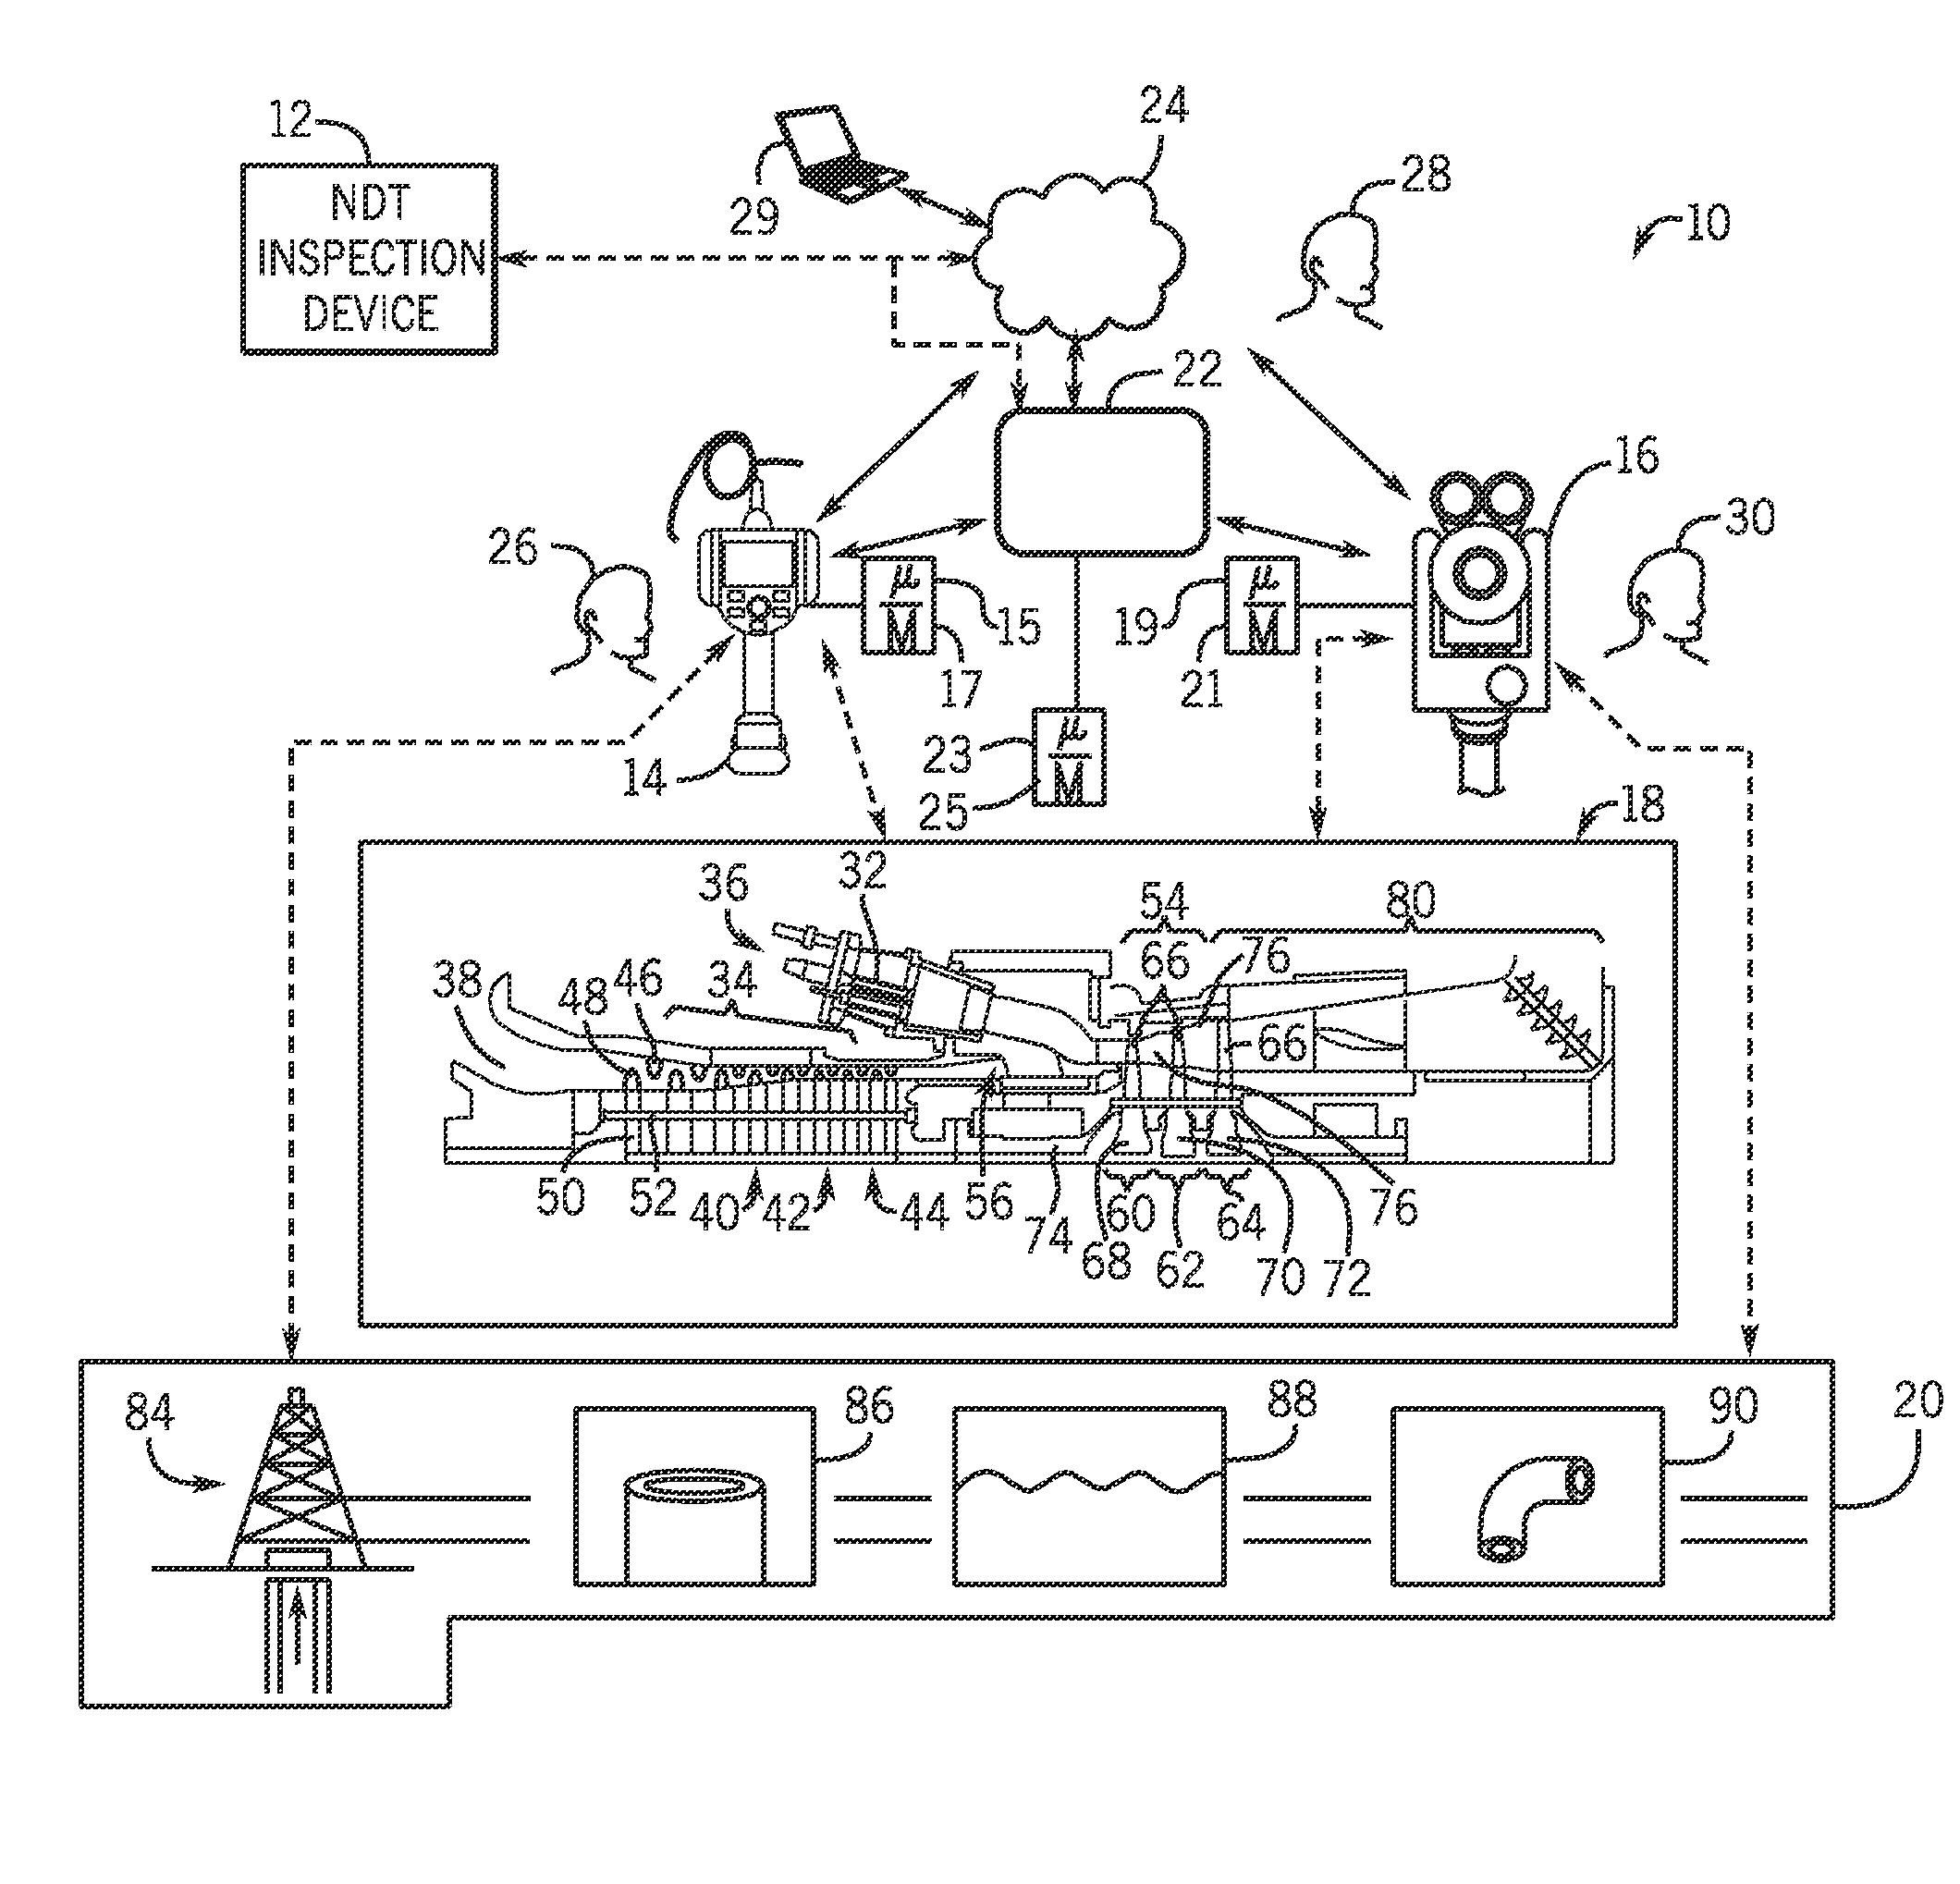 Systems and methods for analyzing data in a non-destructive testing system